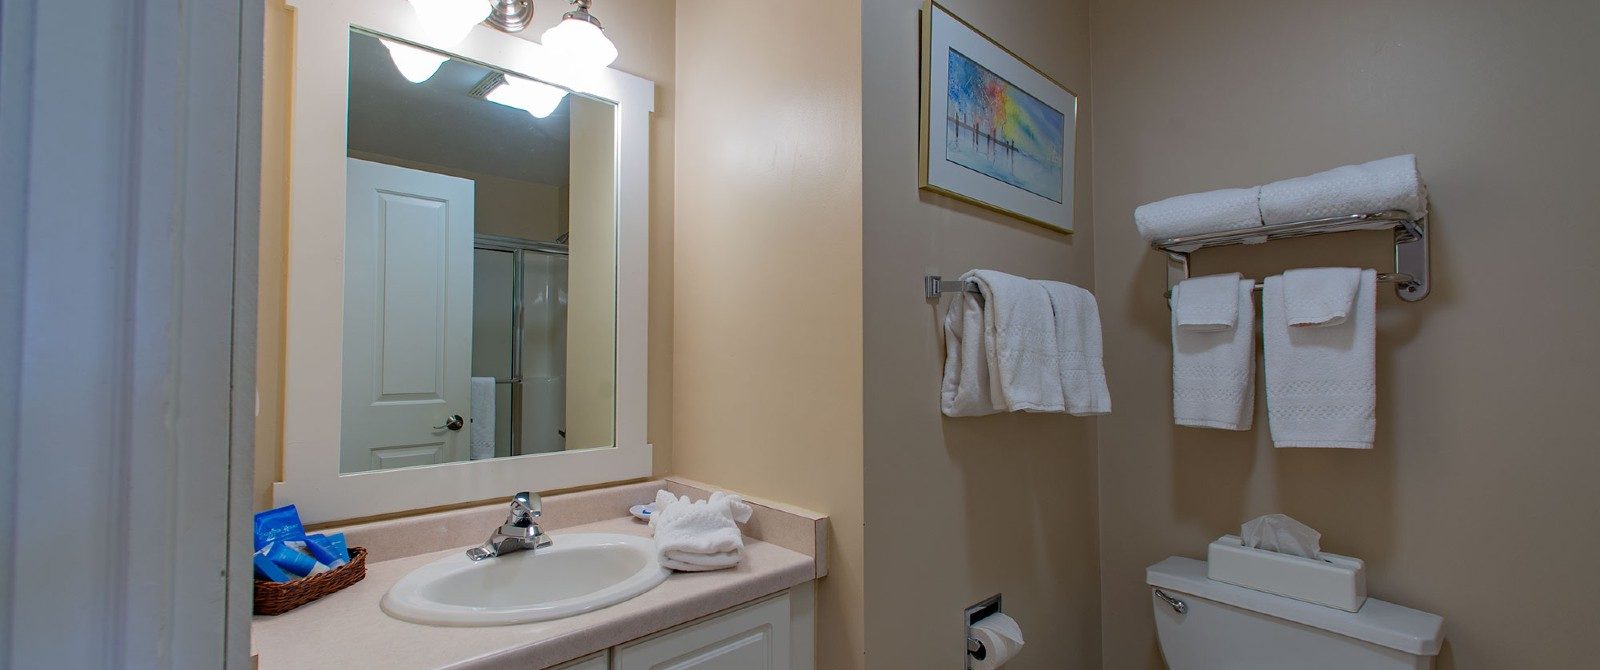 Bathroom with single sink, large white framed mirror, plush white towels hung near toilet